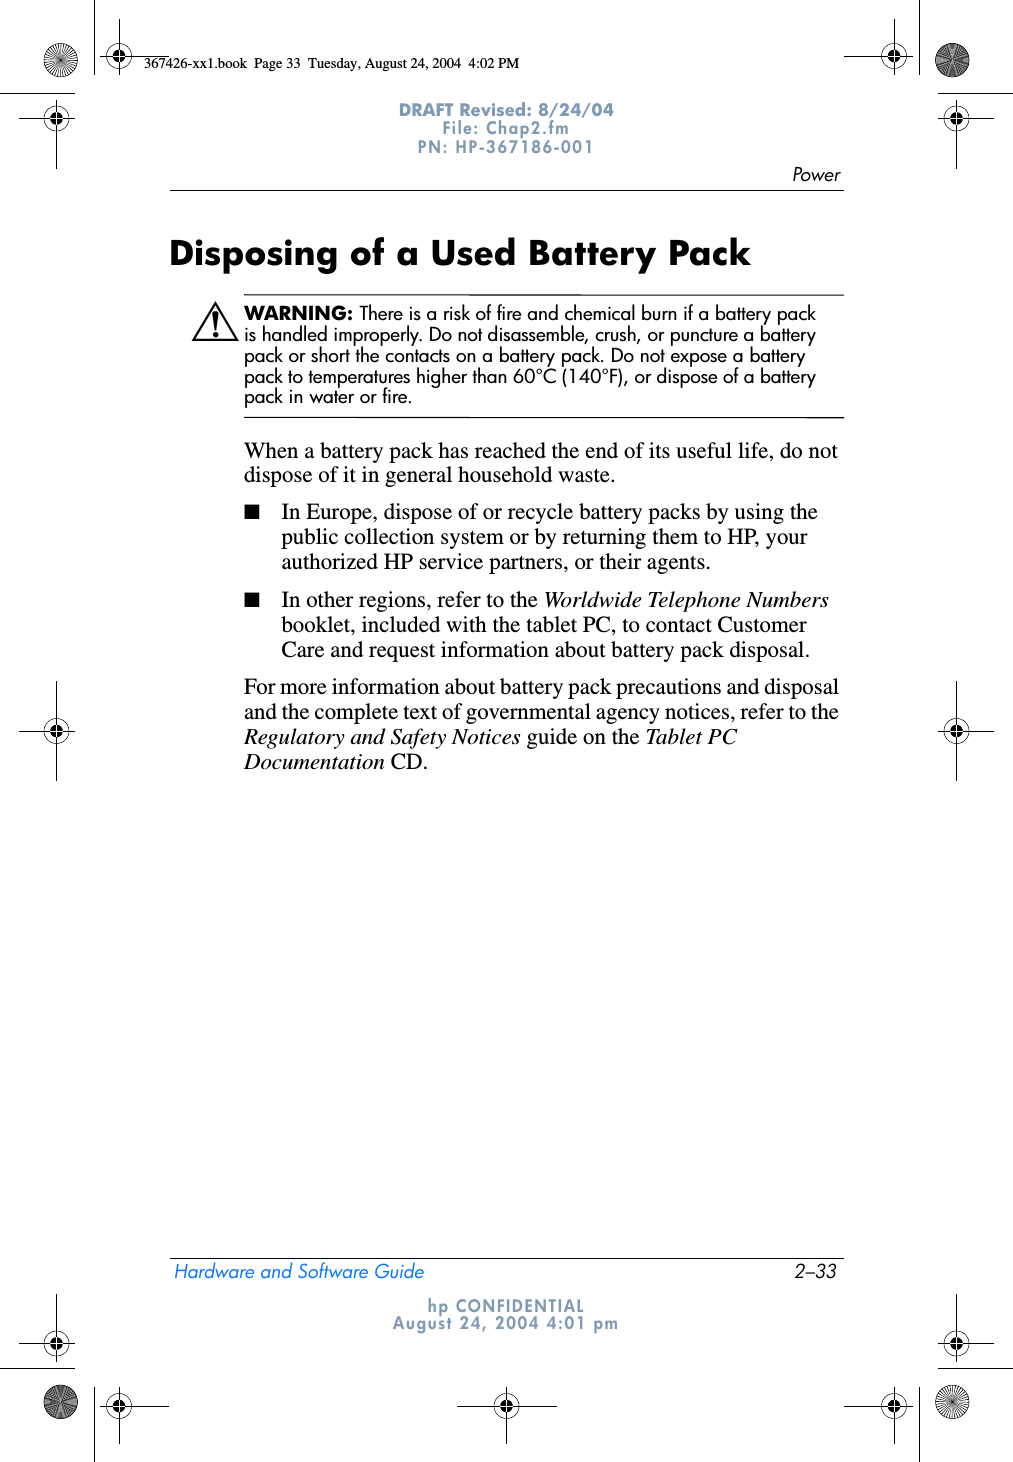 PowerHardware and Software Guide 2–33DRAFT Revised: 8/24/04File: Chap2.fm PN: HP-367186-001 hp CONFIDENTIALAugust 24, 2004 4:01 pmDisposing of a Used Battery PackÅWARNING: There is a risk of fire and chemical burn if a battery pack is handled improperly. Do not disassemble, crush, or puncture a battery pack or short the contacts on a battery pack. Do not expose a battery pack to temperatures higher than 60°C (140°F), or dispose of a battery pack in water or fire.When a battery pack has reached the end of its useful life, do not dispose of it in general household waste.■In Europe, dispose of or recycle battery packs by using the public collection system or by returning them to HP, your authorized HP service partners, or their agents.■In other regions, refer to the Worldwide Telephone Numbers booklet, included with the tablet PC, to contact Customer Care and request information about battery pack disposal.For more information about battery pack precautions and disposal and the complete text of governmental agency notices, refer to the Regulatory and Safety Notices guide on the Tablet PC Documentation CD. 367426-xx1.book  Page 33  Tuesday, August 24, 2004  4:02 PM